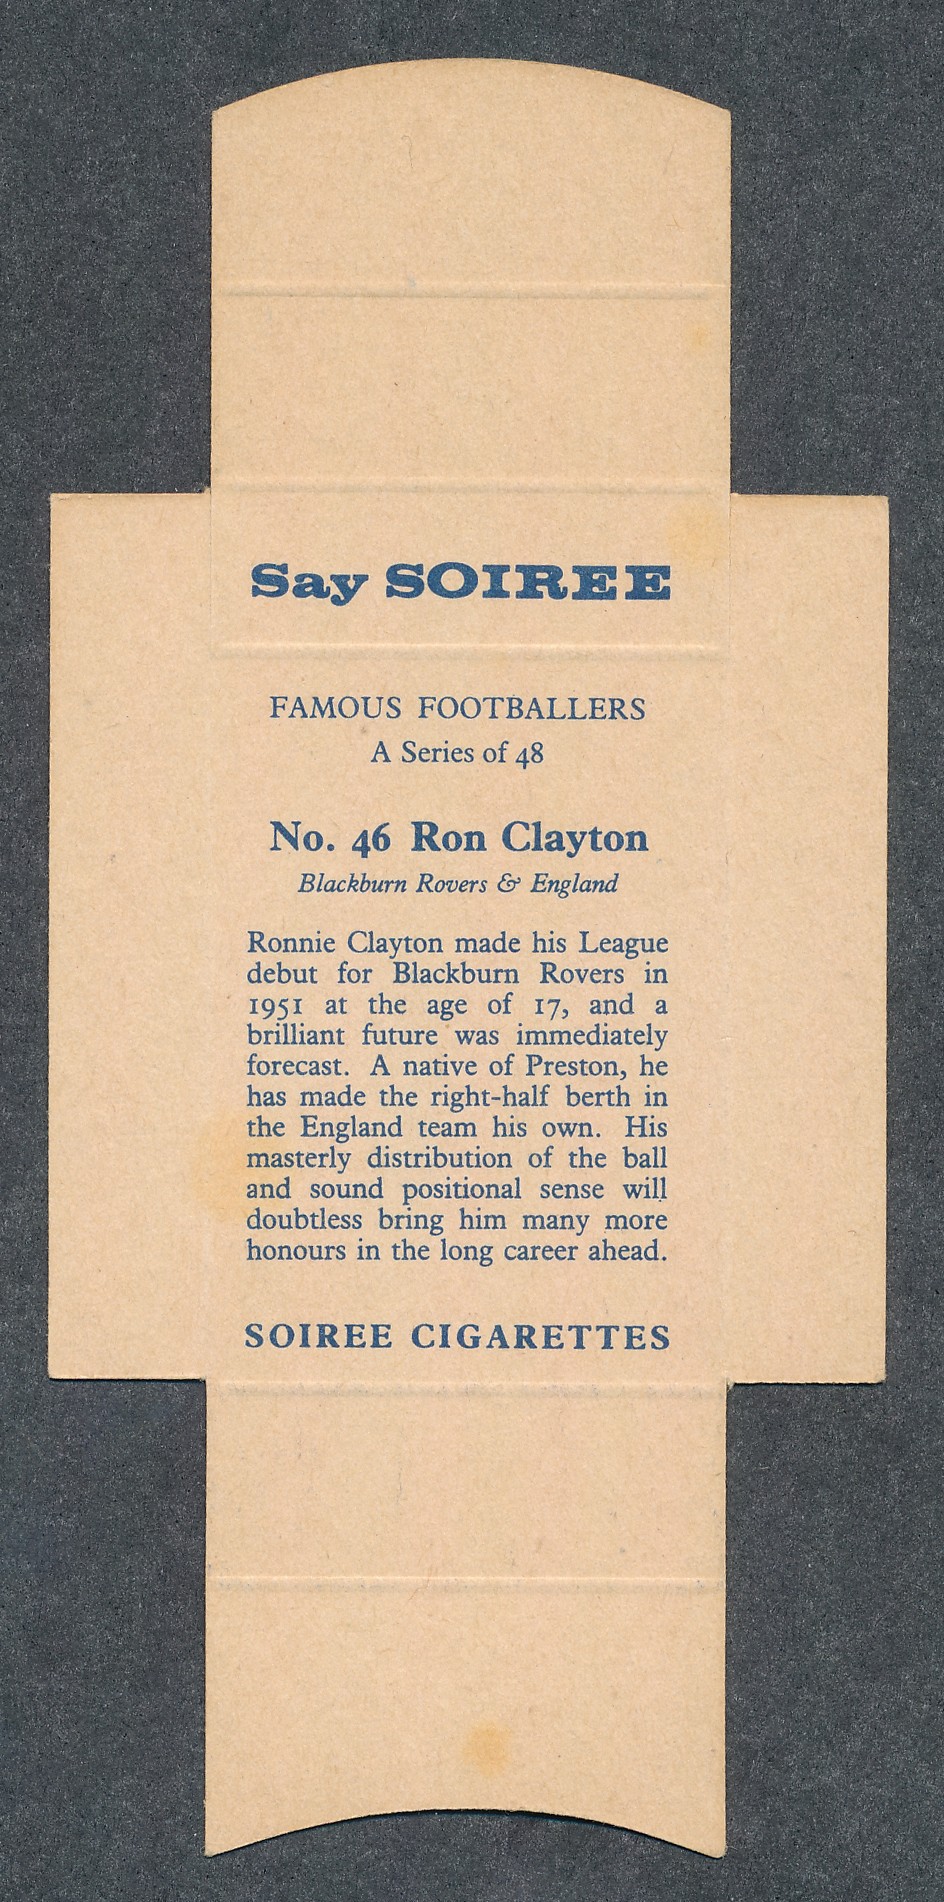 Soiree Cigarettes, Mauritius, Famous Footballers uncut packet issue, No.46 Ron Clayton, Blackburn - Image 2 of 2